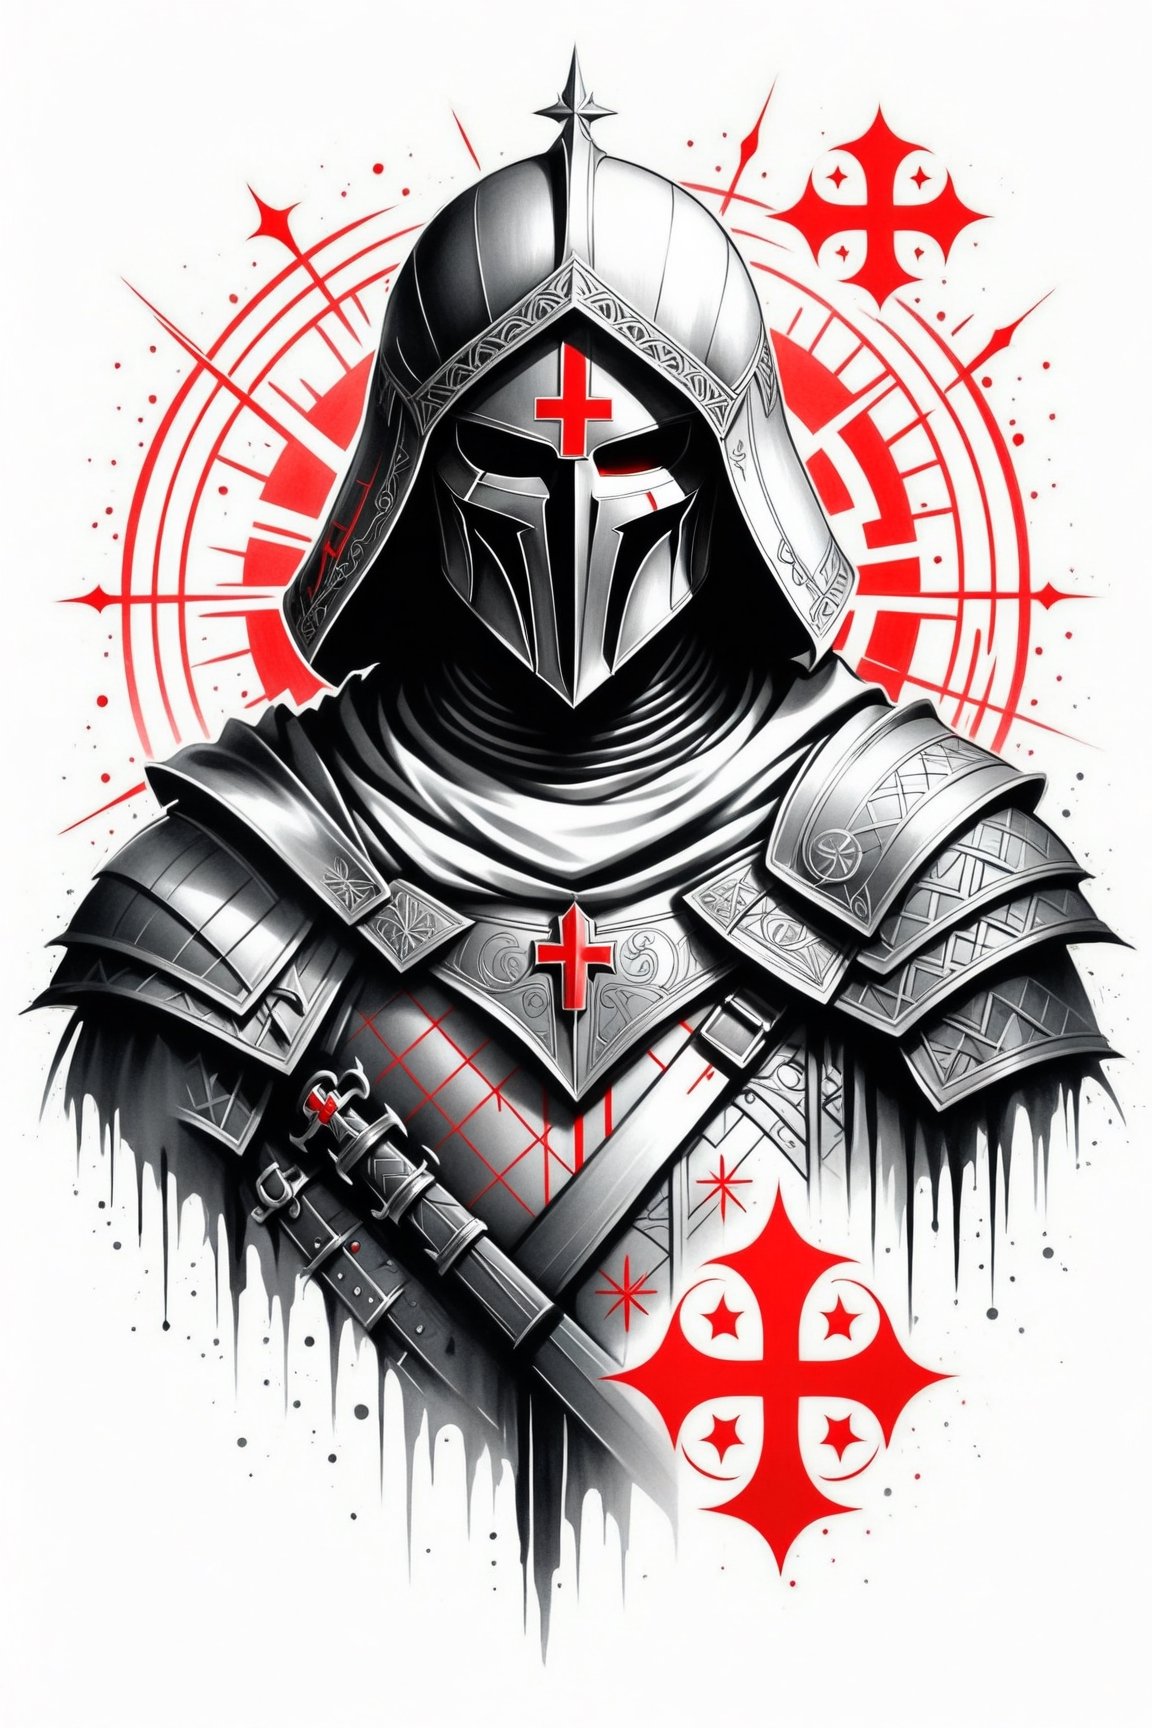 lineart tattoo design, Knight Templar, geometric forms with red cross superimpossed, ((drawing lines)), drawing in black and withe, thick lines, filagree, realistic, silkscreen dot pattern in background, white background, monster, Leonardo Style,Pencil Draw,Fashion Illustration,Flat vector art,pencil sketch